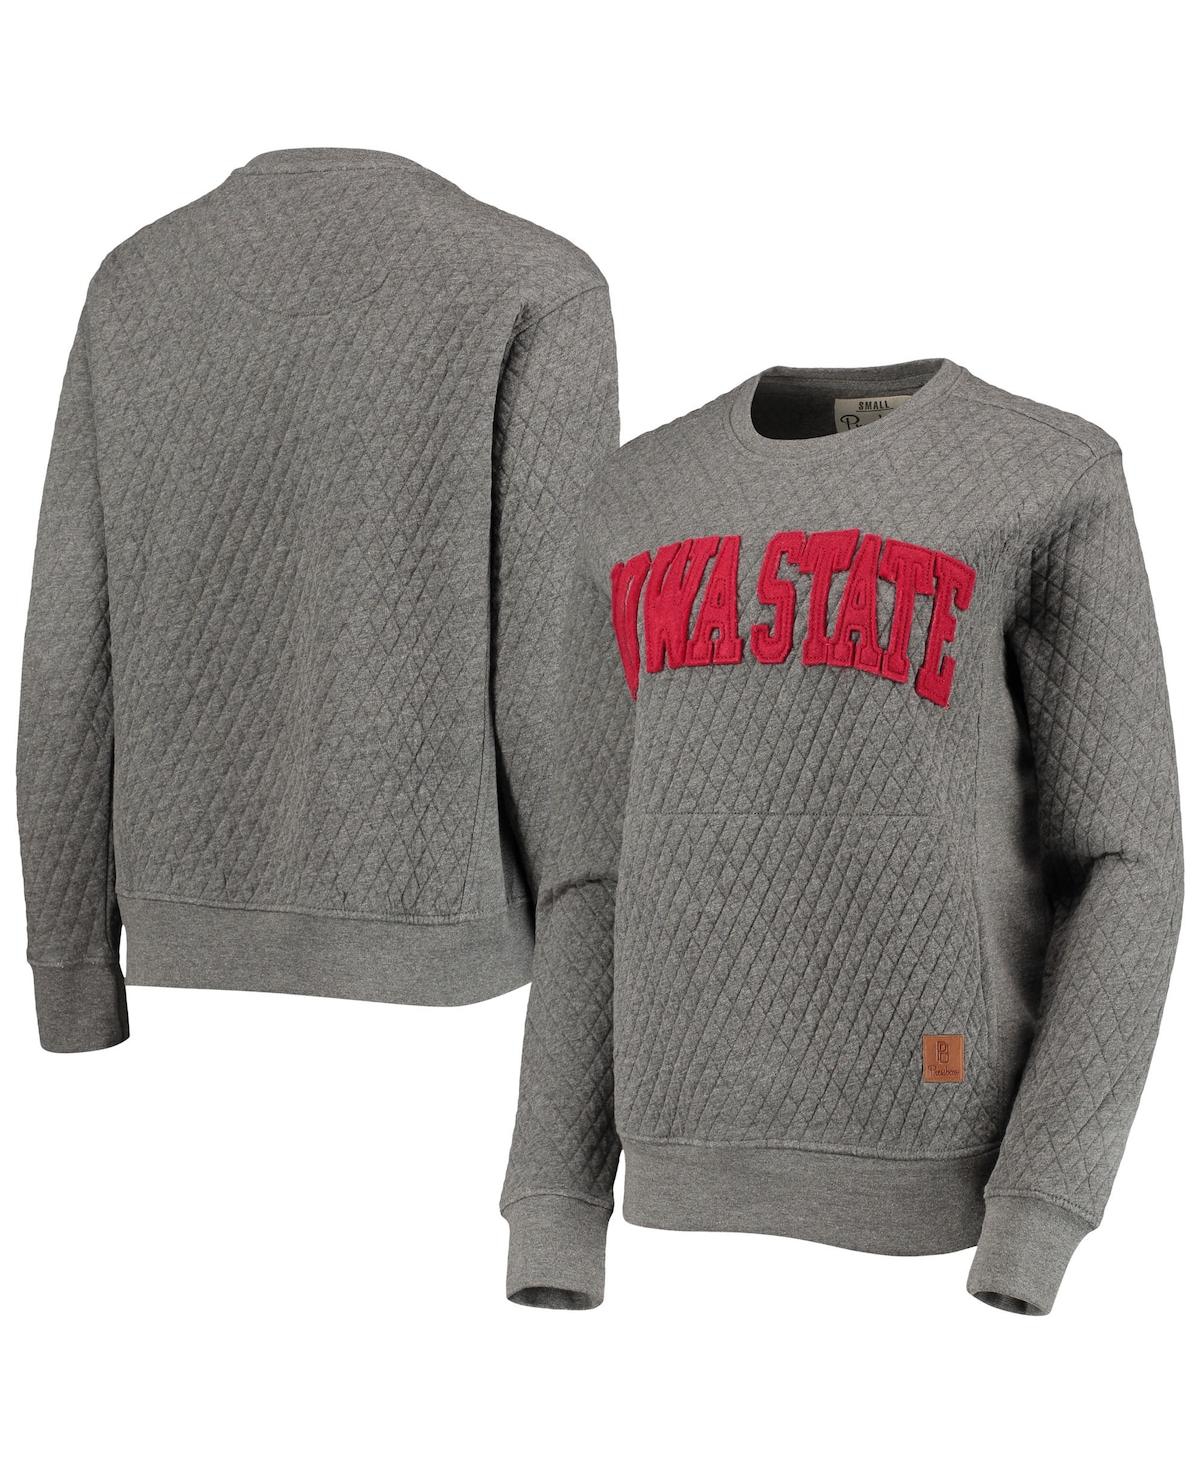 Shop Pressbox Women's  Heather Charcoal Iowa State Cyclones Moose Quilted Pullover Sweatshirt